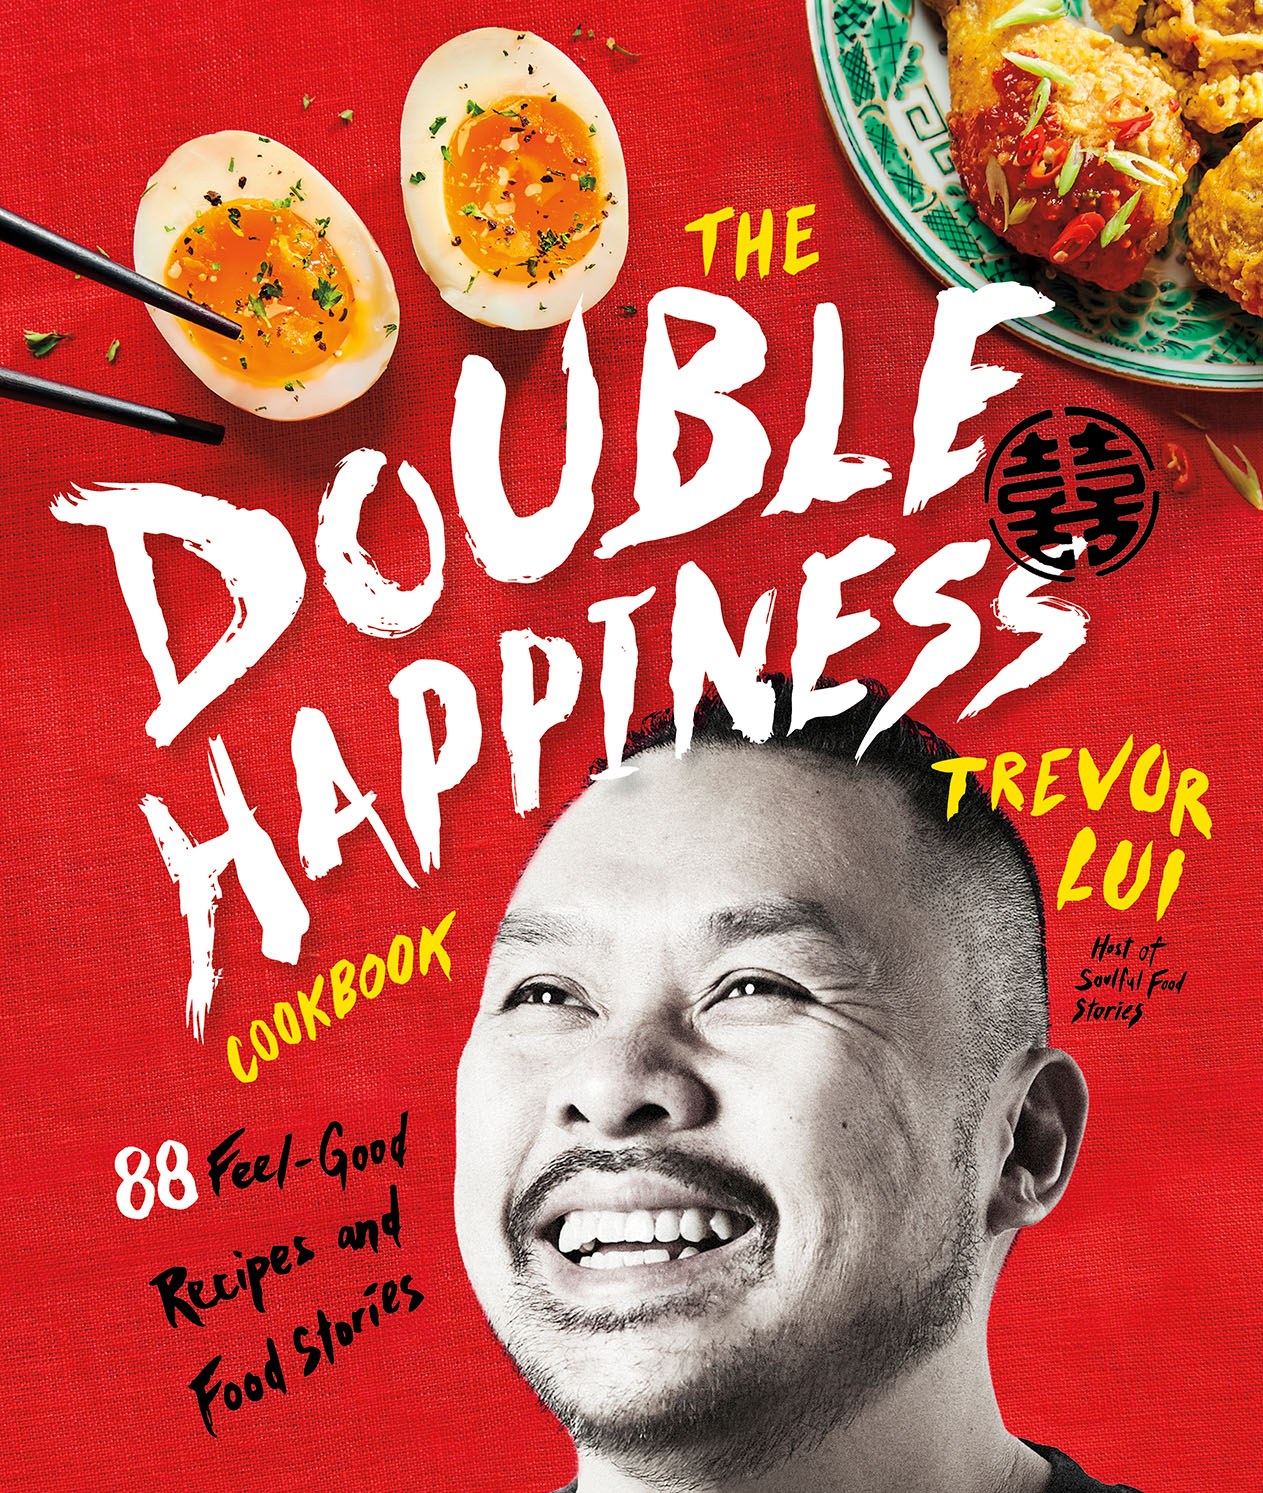 Double Happiness Cookbook, The